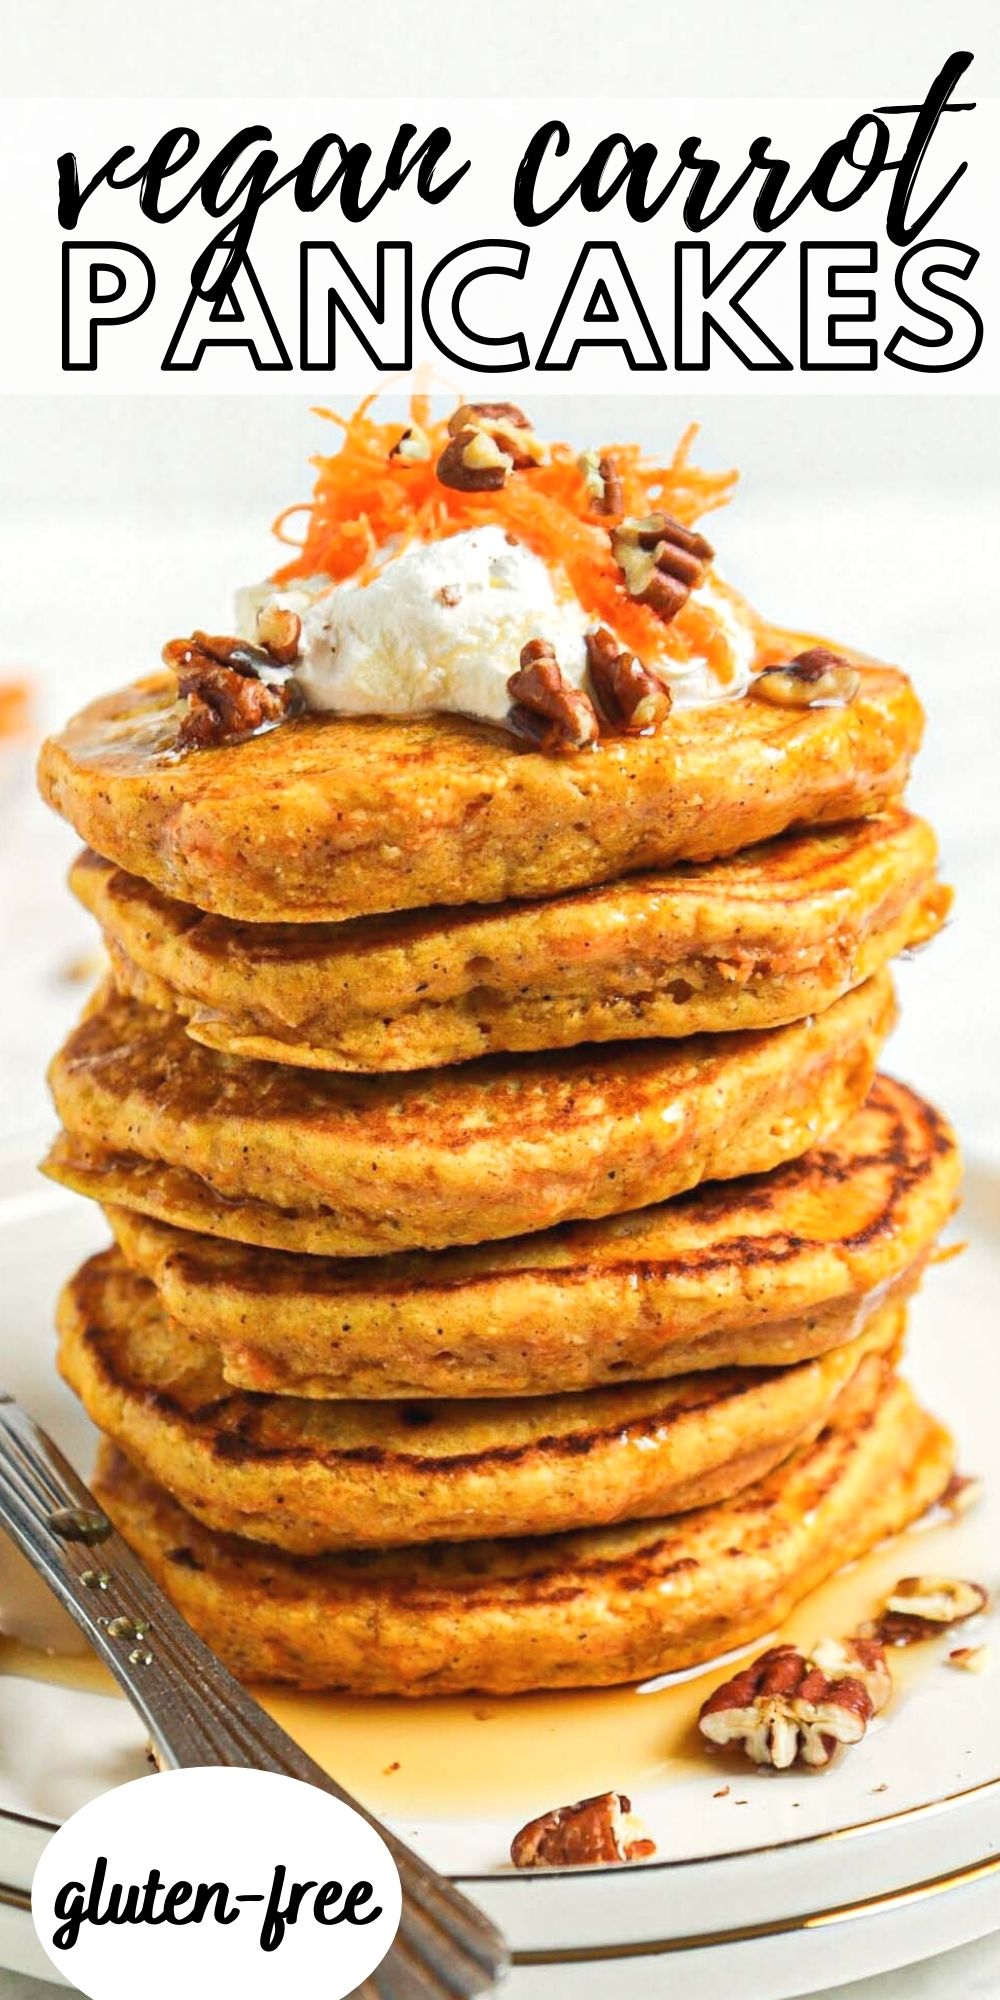 Pinterest graphic with an image and text for vegan carrot cake pancakes.